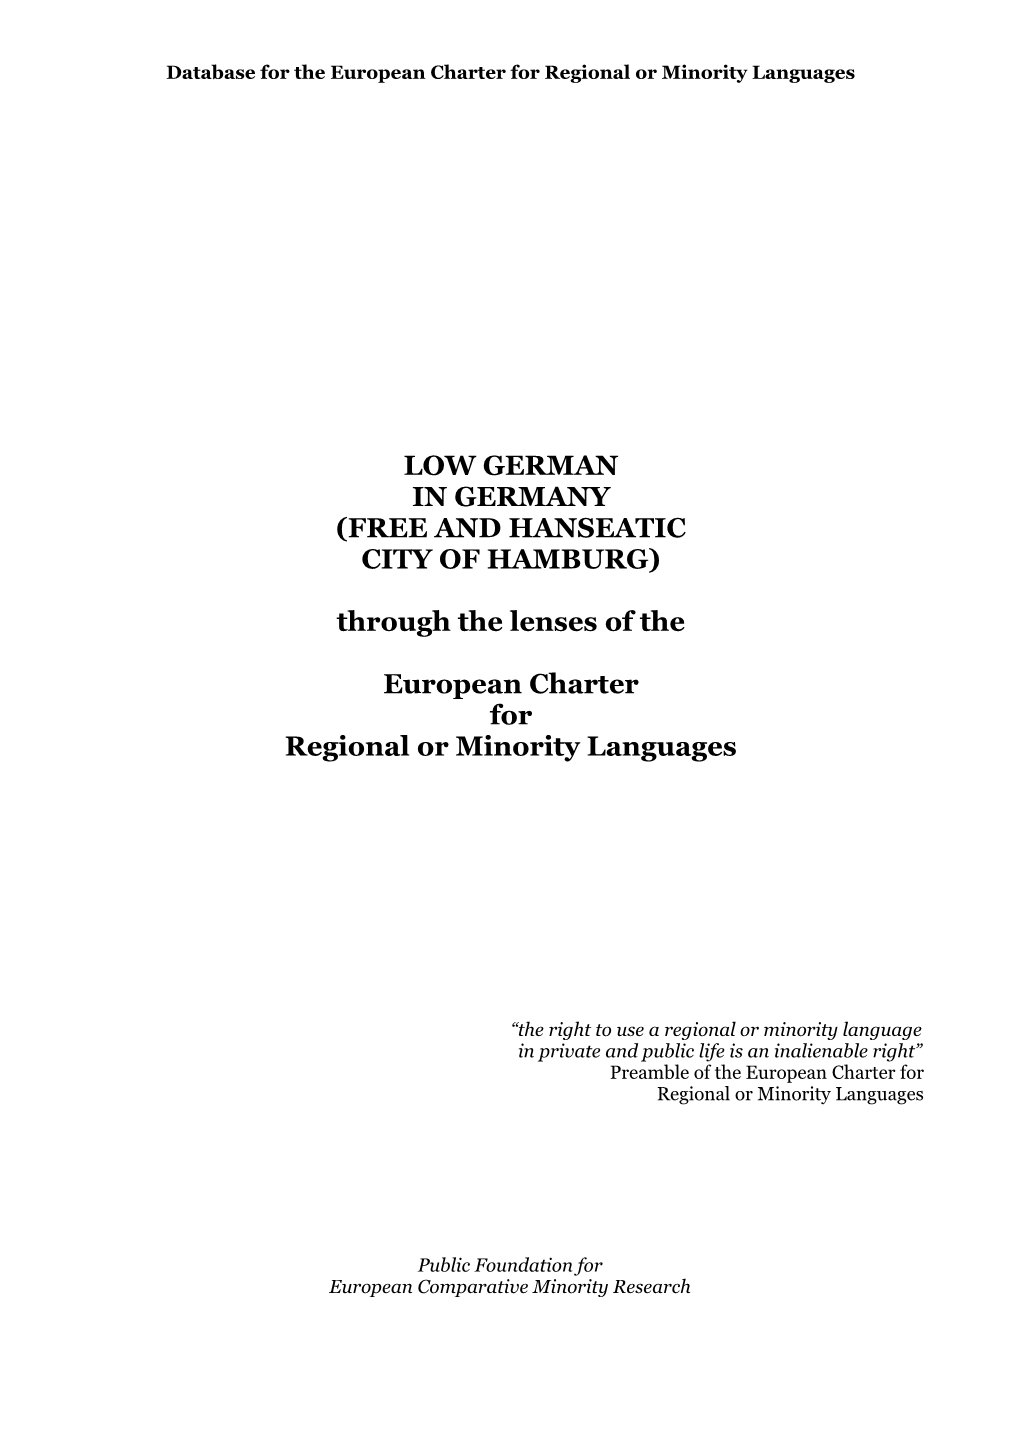 European Charter for Regional Or Minority Languages